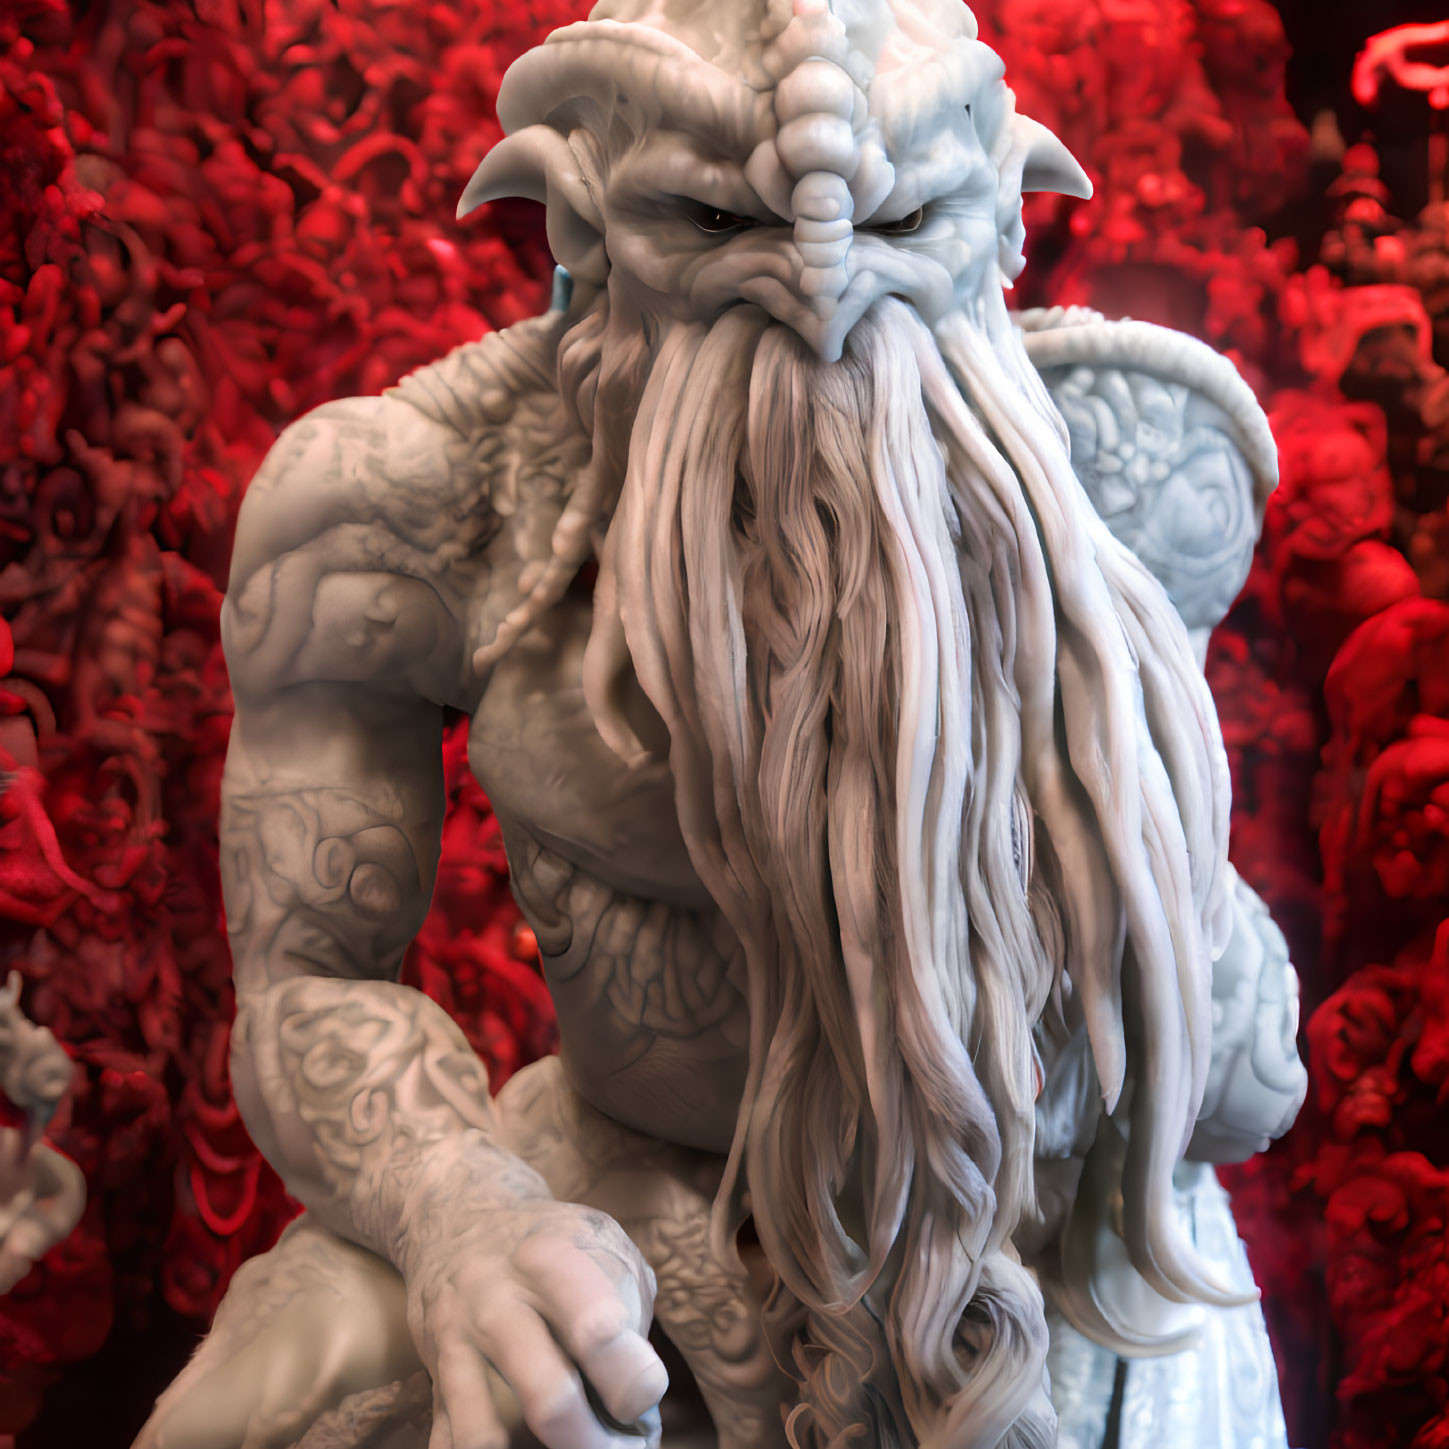 Detailed Fantasy Creature Sculpture with Horns and Beard on Red Background